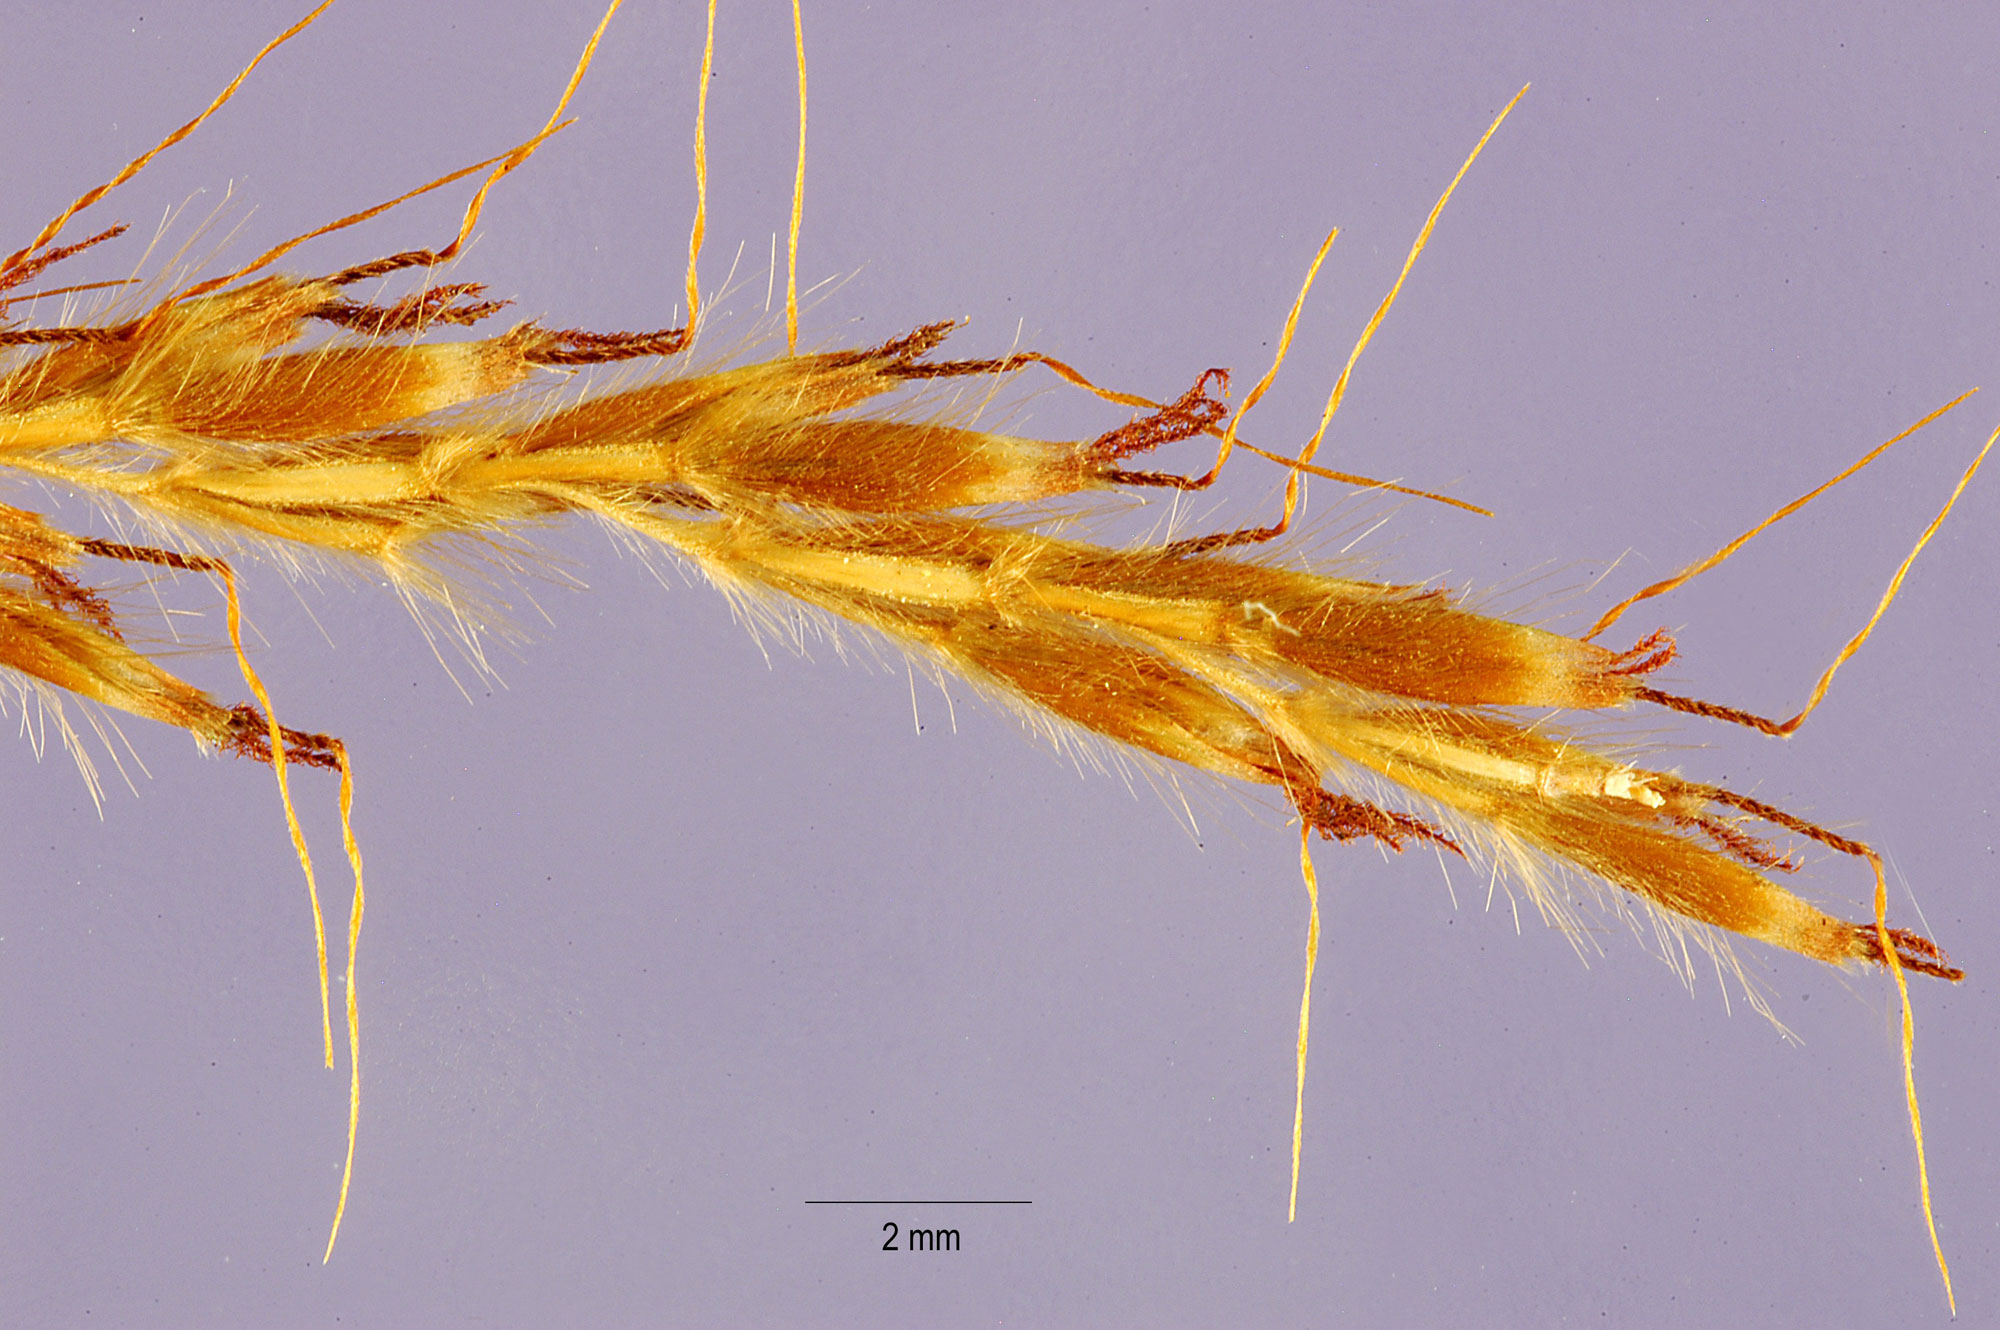 Photograph of an inflorescence of Java grass. The photo shows the top of an inflorescence, with its apex to the right. The spikelets are dry and brown and organized on a yellow, zig-zagging stalk. The spikelets have awns, each with a red, twisted base and long, yellow extension oriented horizontally. The whole structure has hairs.